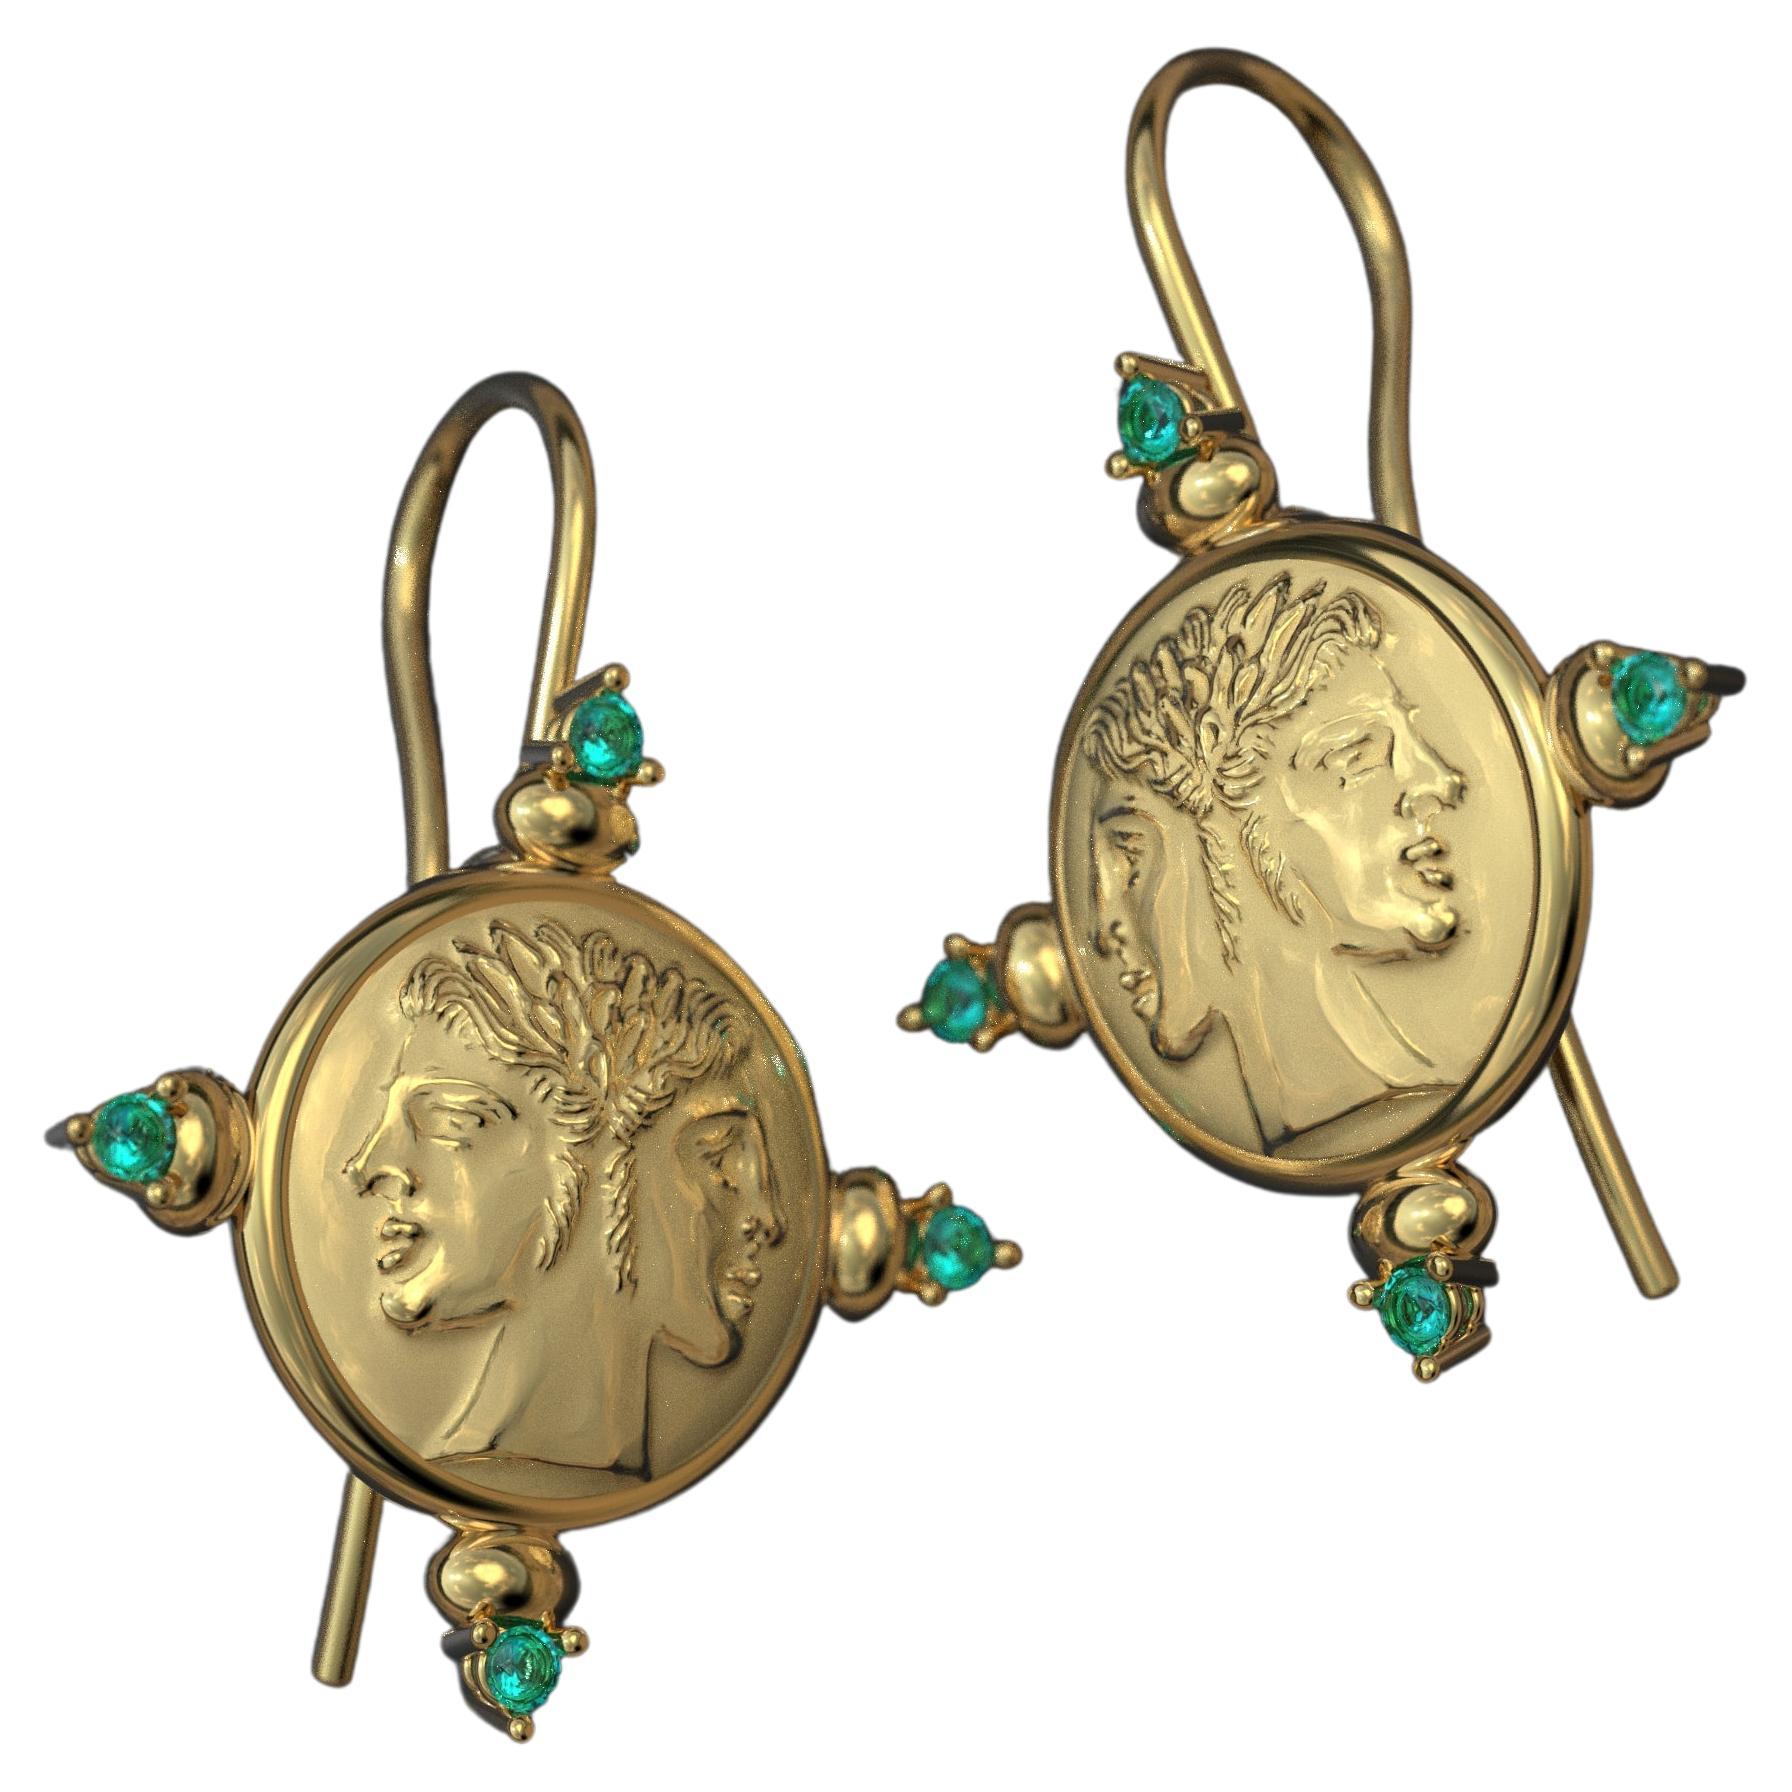 Only made to order.
Transport yourself to the captivating era of ancient Rome with our stunning 14k Gold Earrings, meticulously handcrafted in Italy by Oltremare Gioielli. These exquisite earrings pay homage to the grandeur of Roman aesthetics,